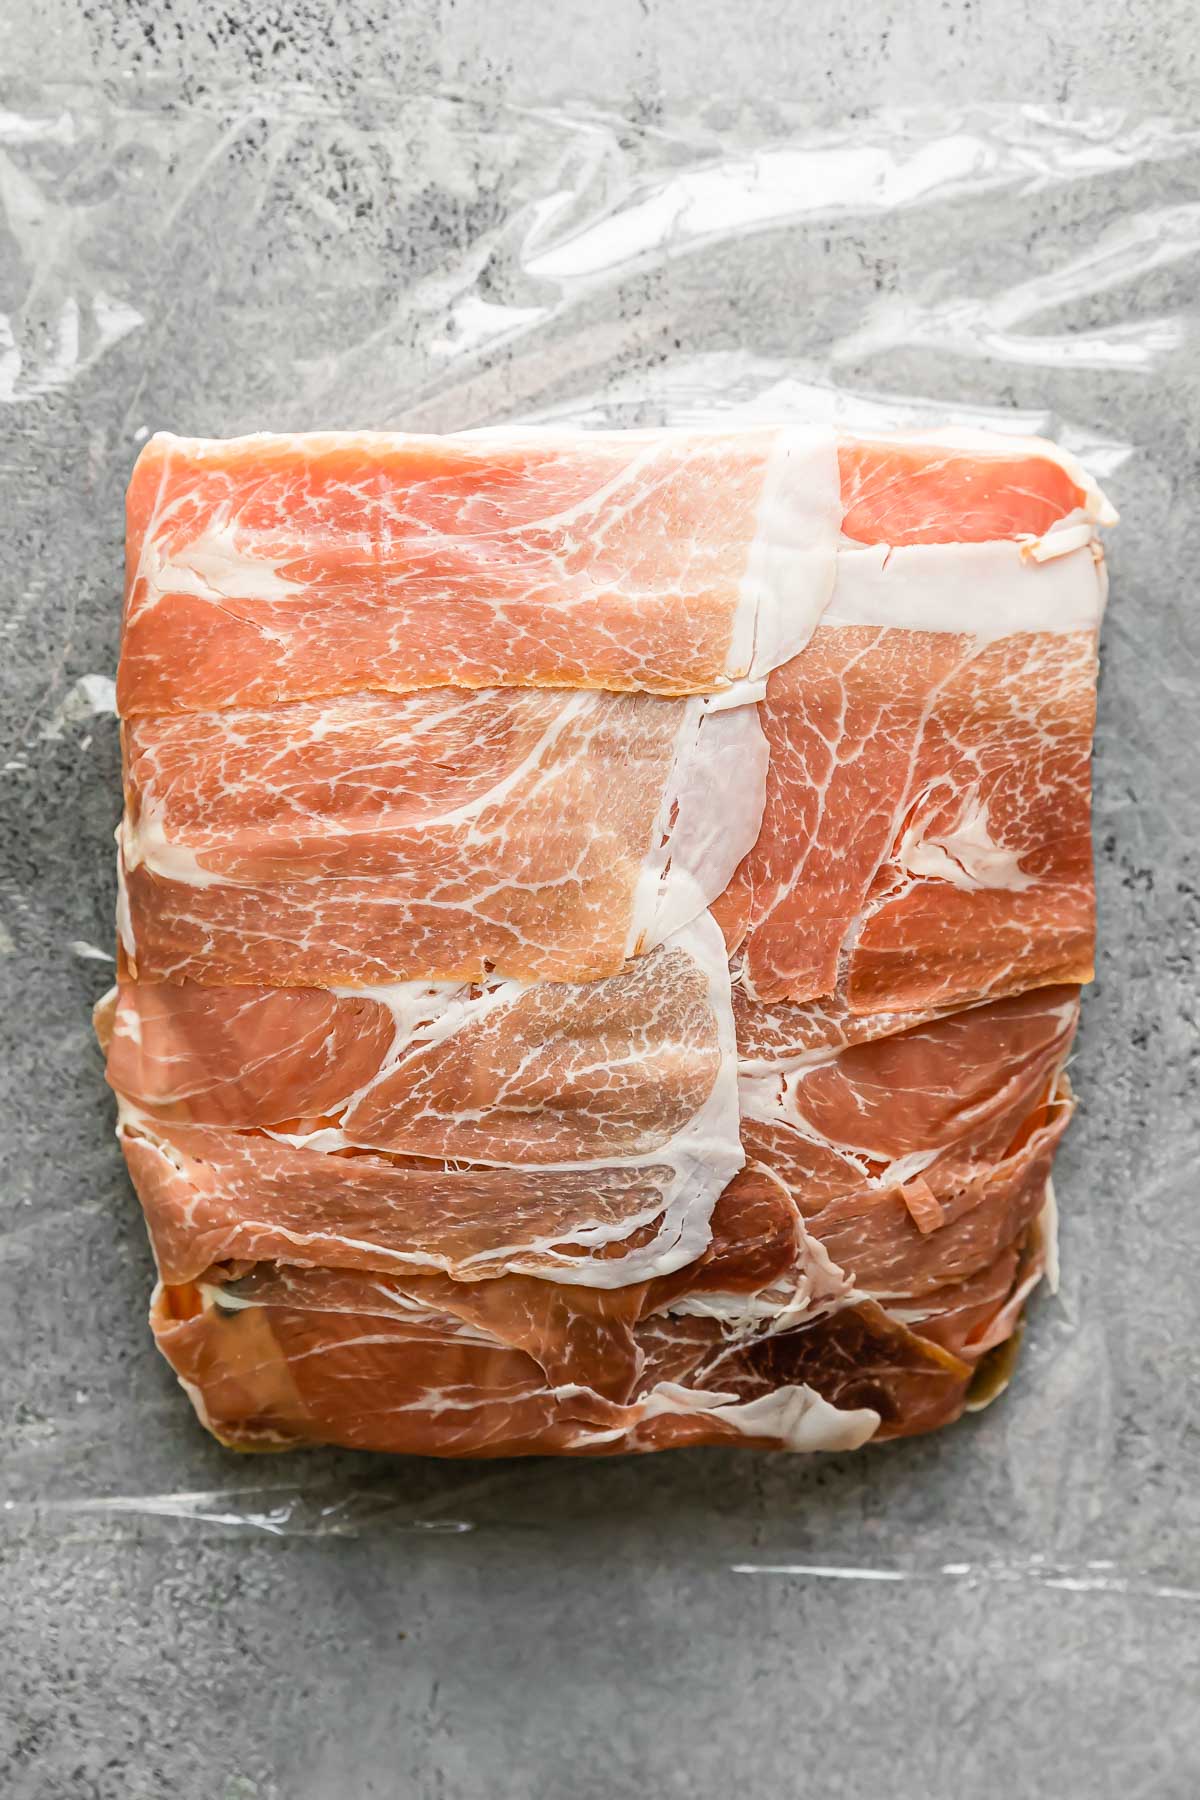 Layered salmon fillets sit atop a large piece of plastic wrap. Pieces of prosciutto are placed over top of the fillets, overlapping eachother to cover completely.